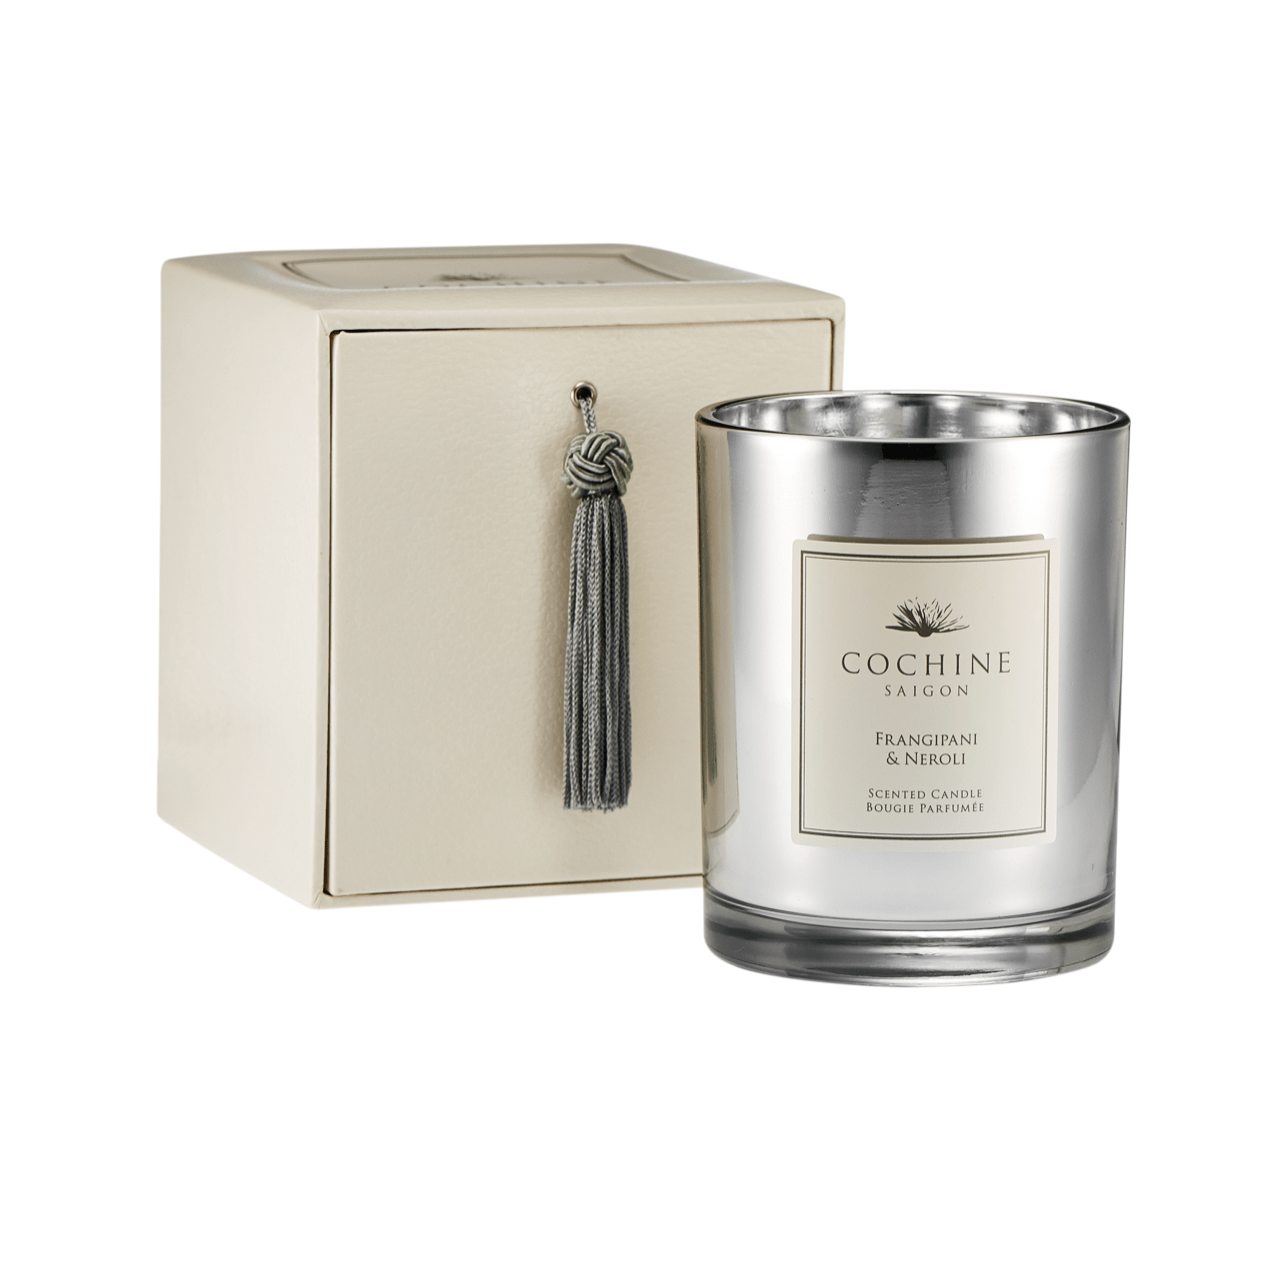 Cochine Home Fragrances of Cochines luxury scented candles and Cochine reed diffuers in Cochine Frangipani & Neroli Candle